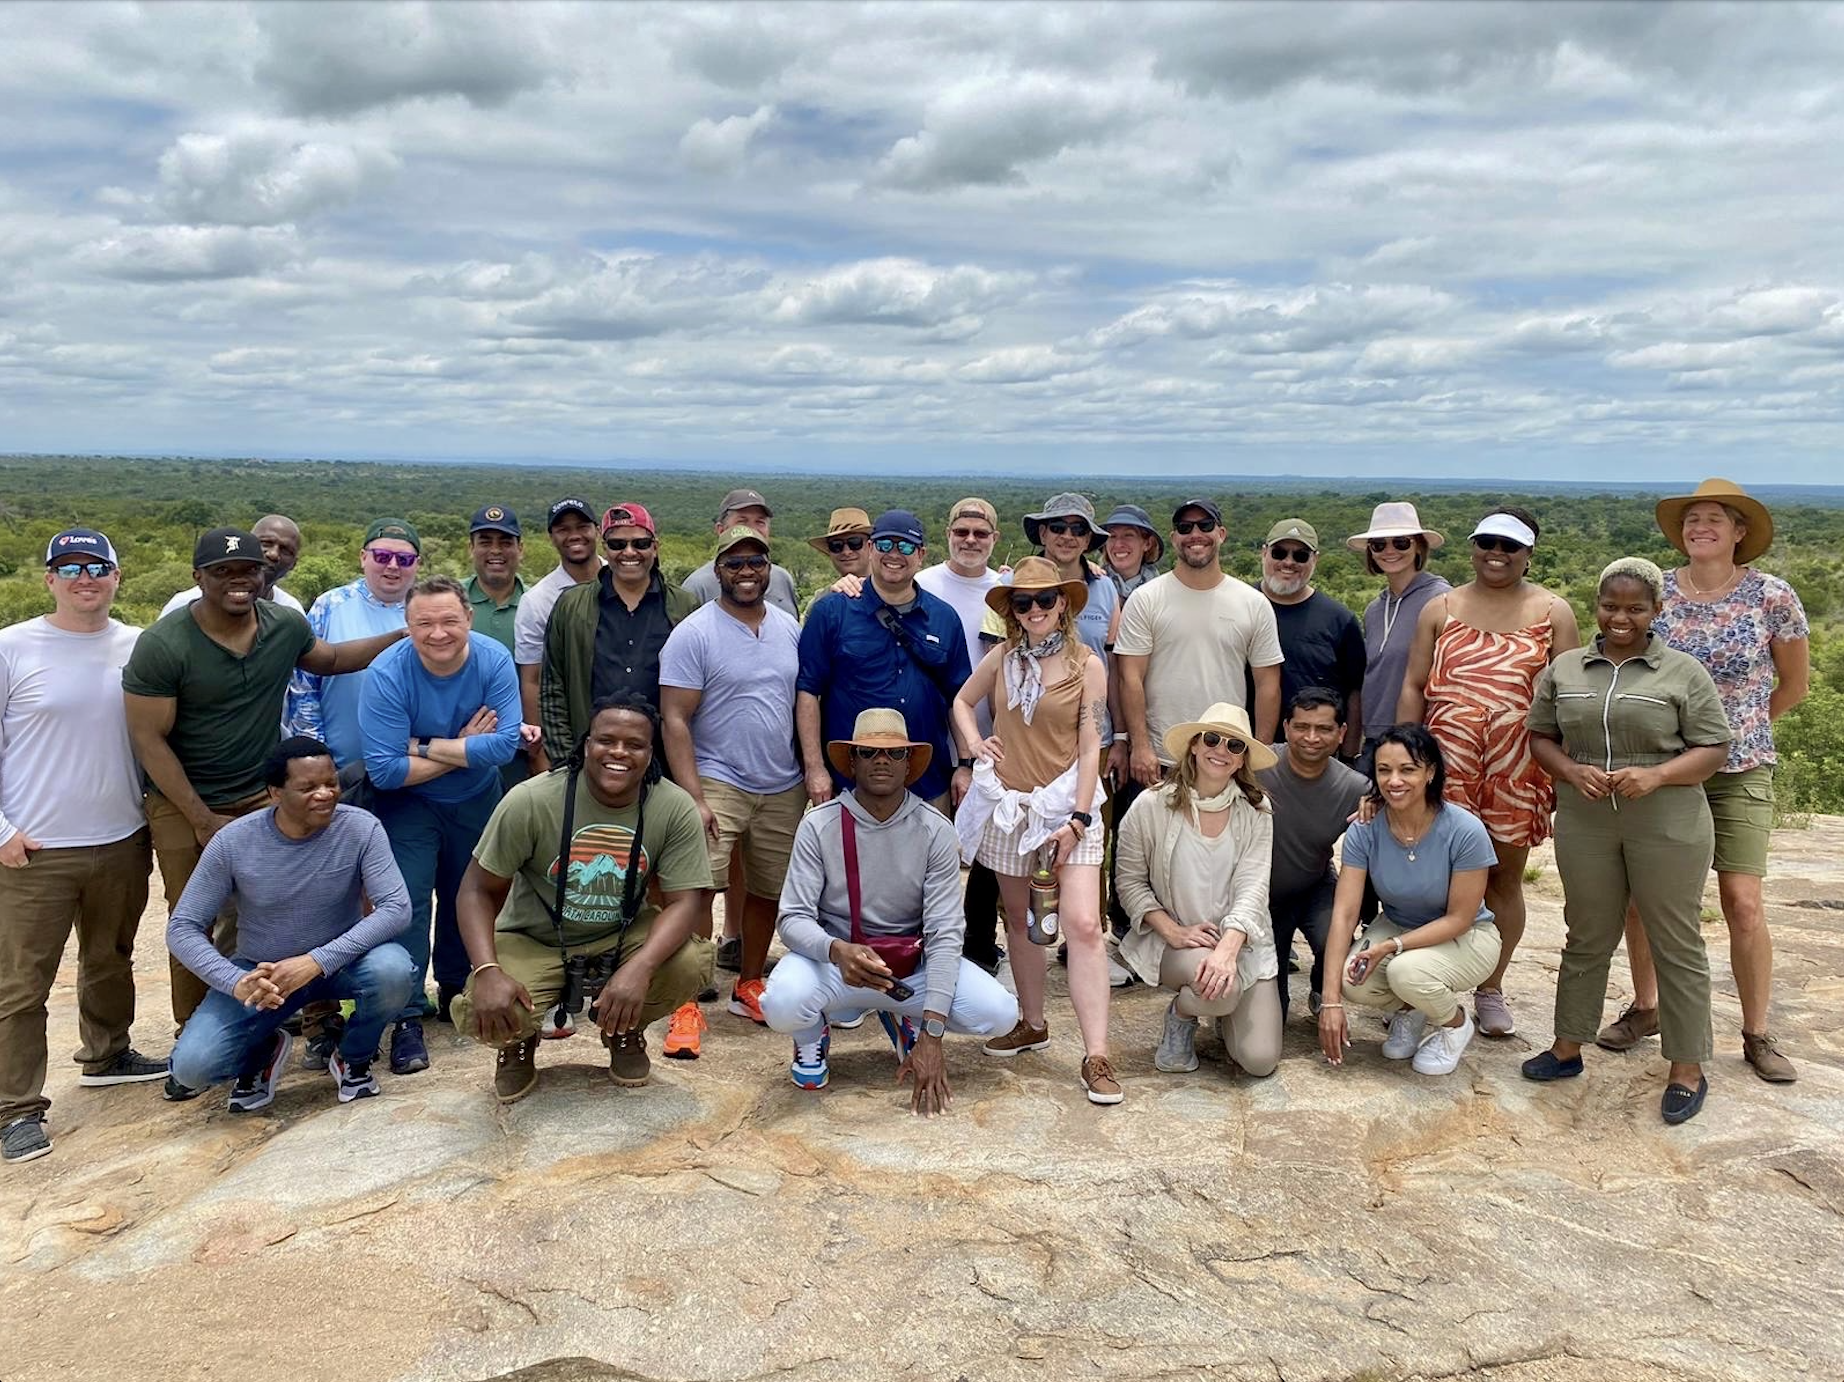 Georgia State EMBA students in South Africa's Kruger National Park during their international residency